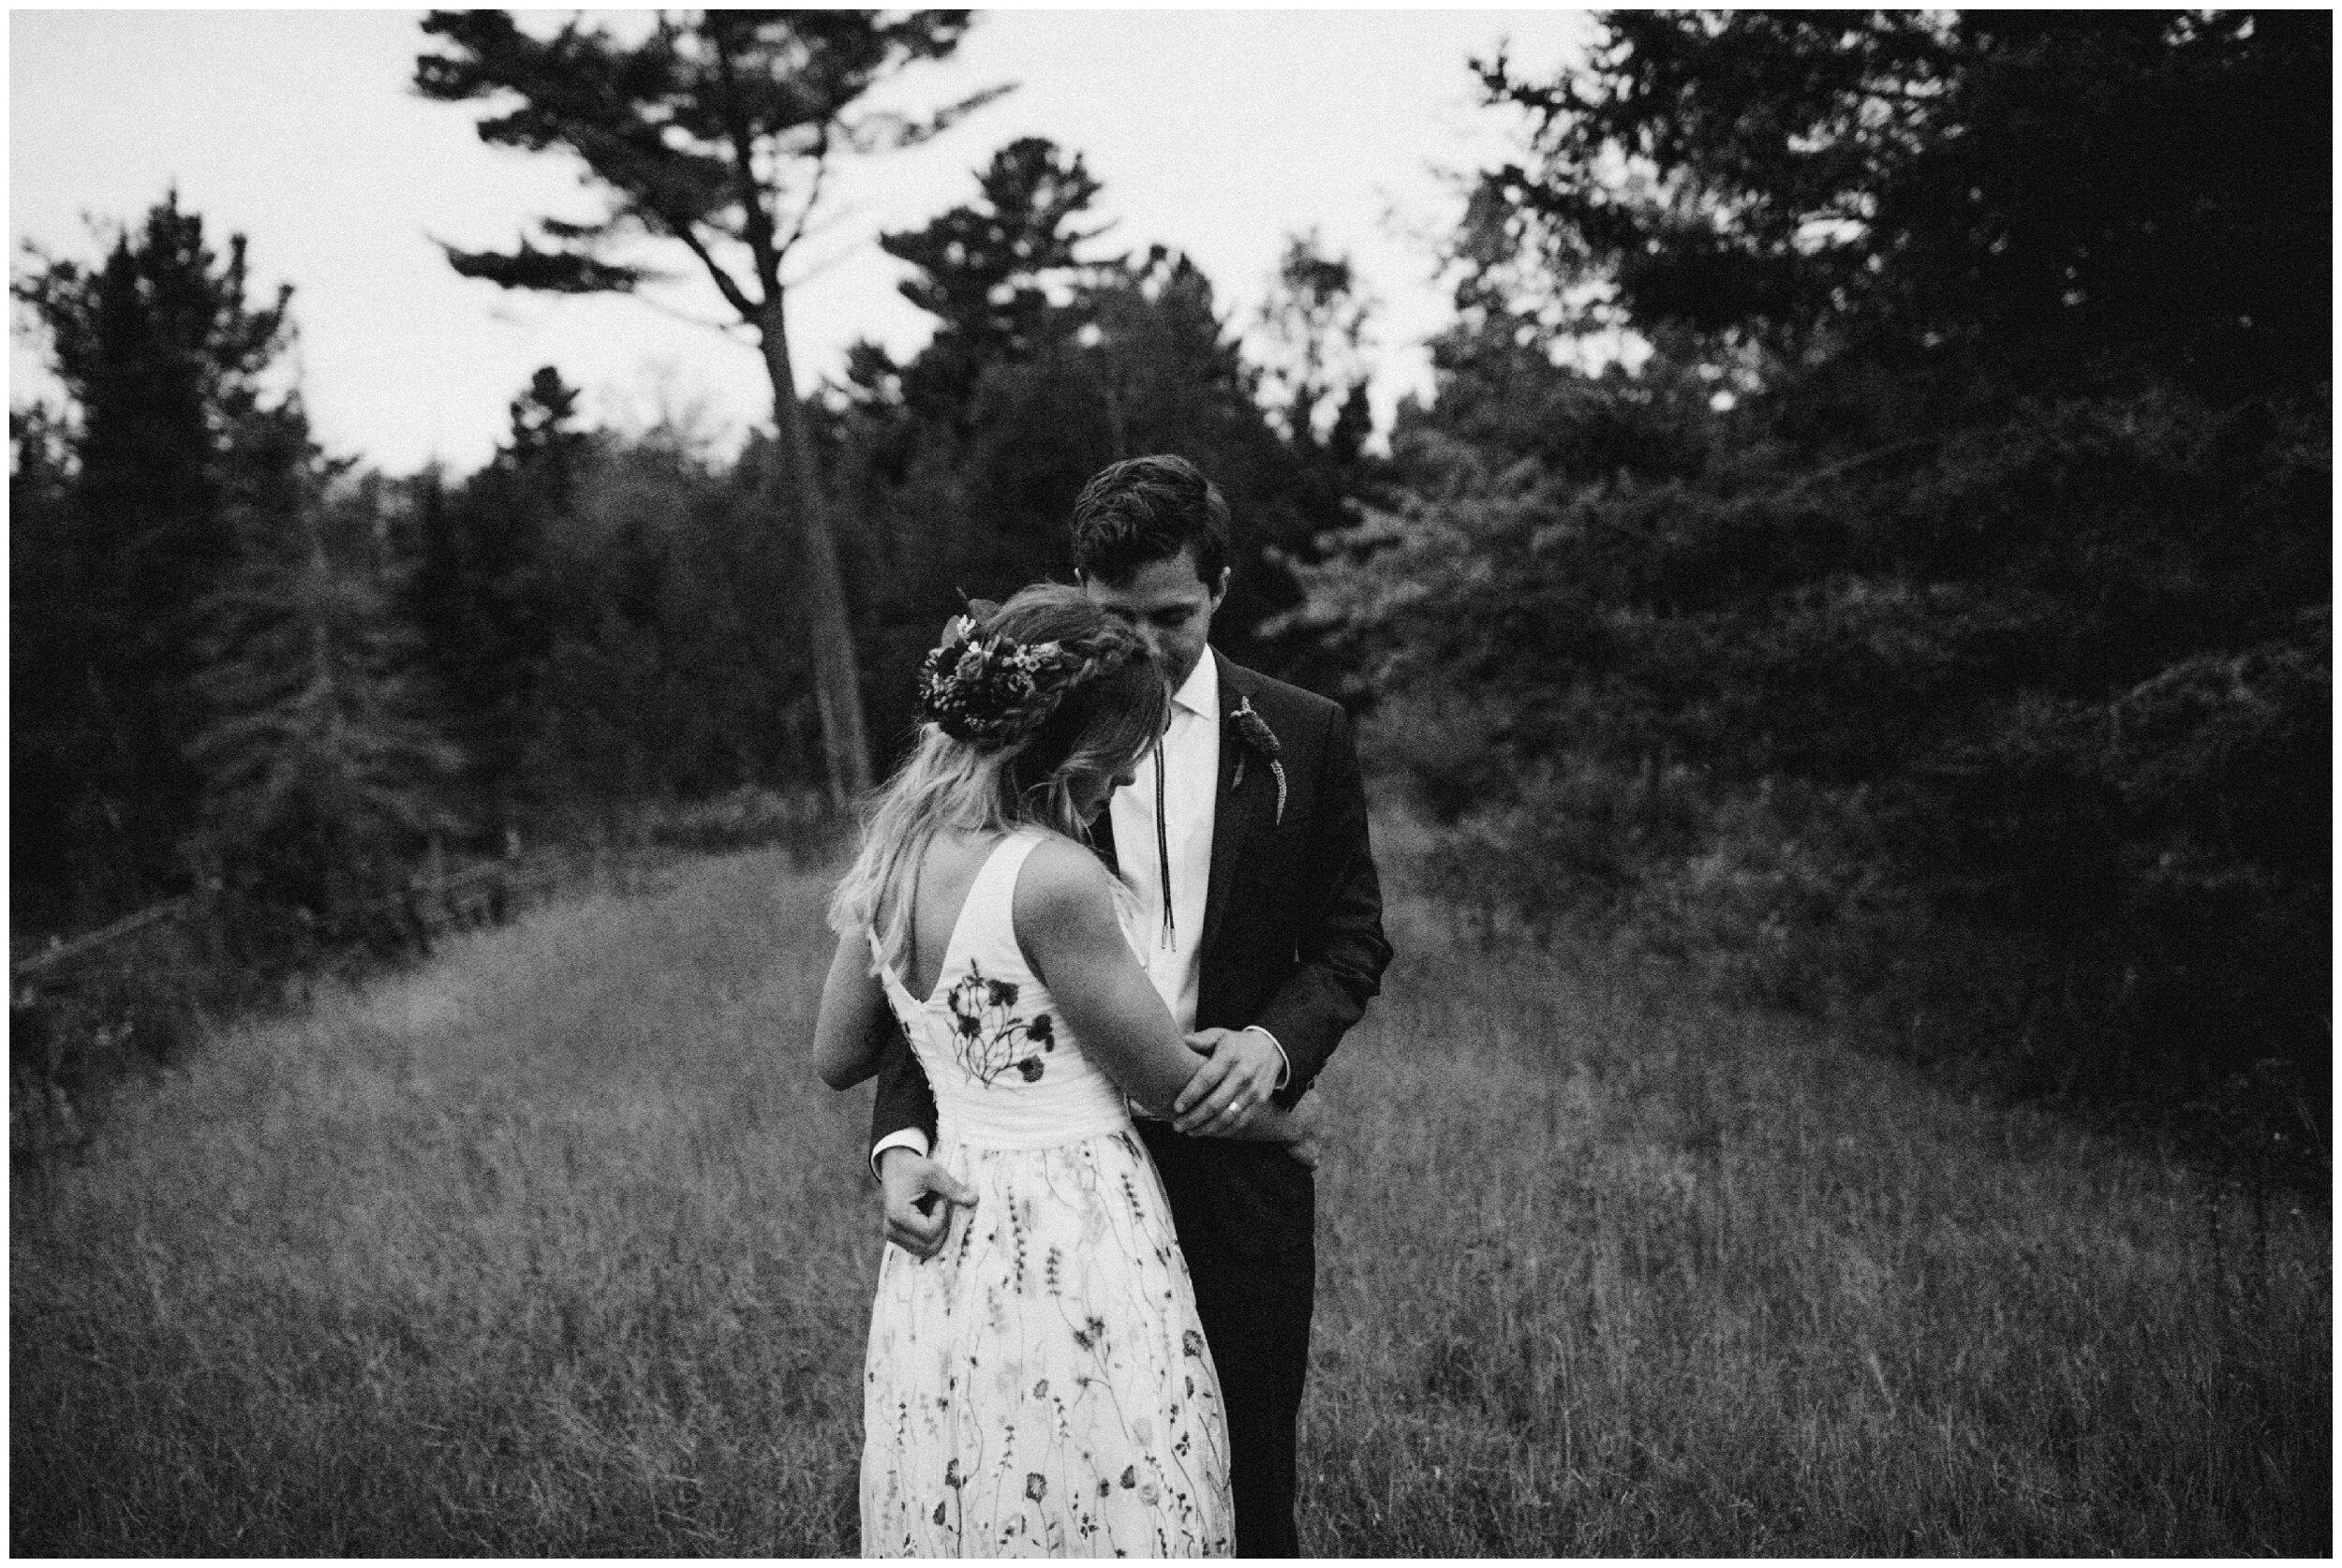 Bride and groom standing in field surrounded by woods at Minnesota summer camp wedding